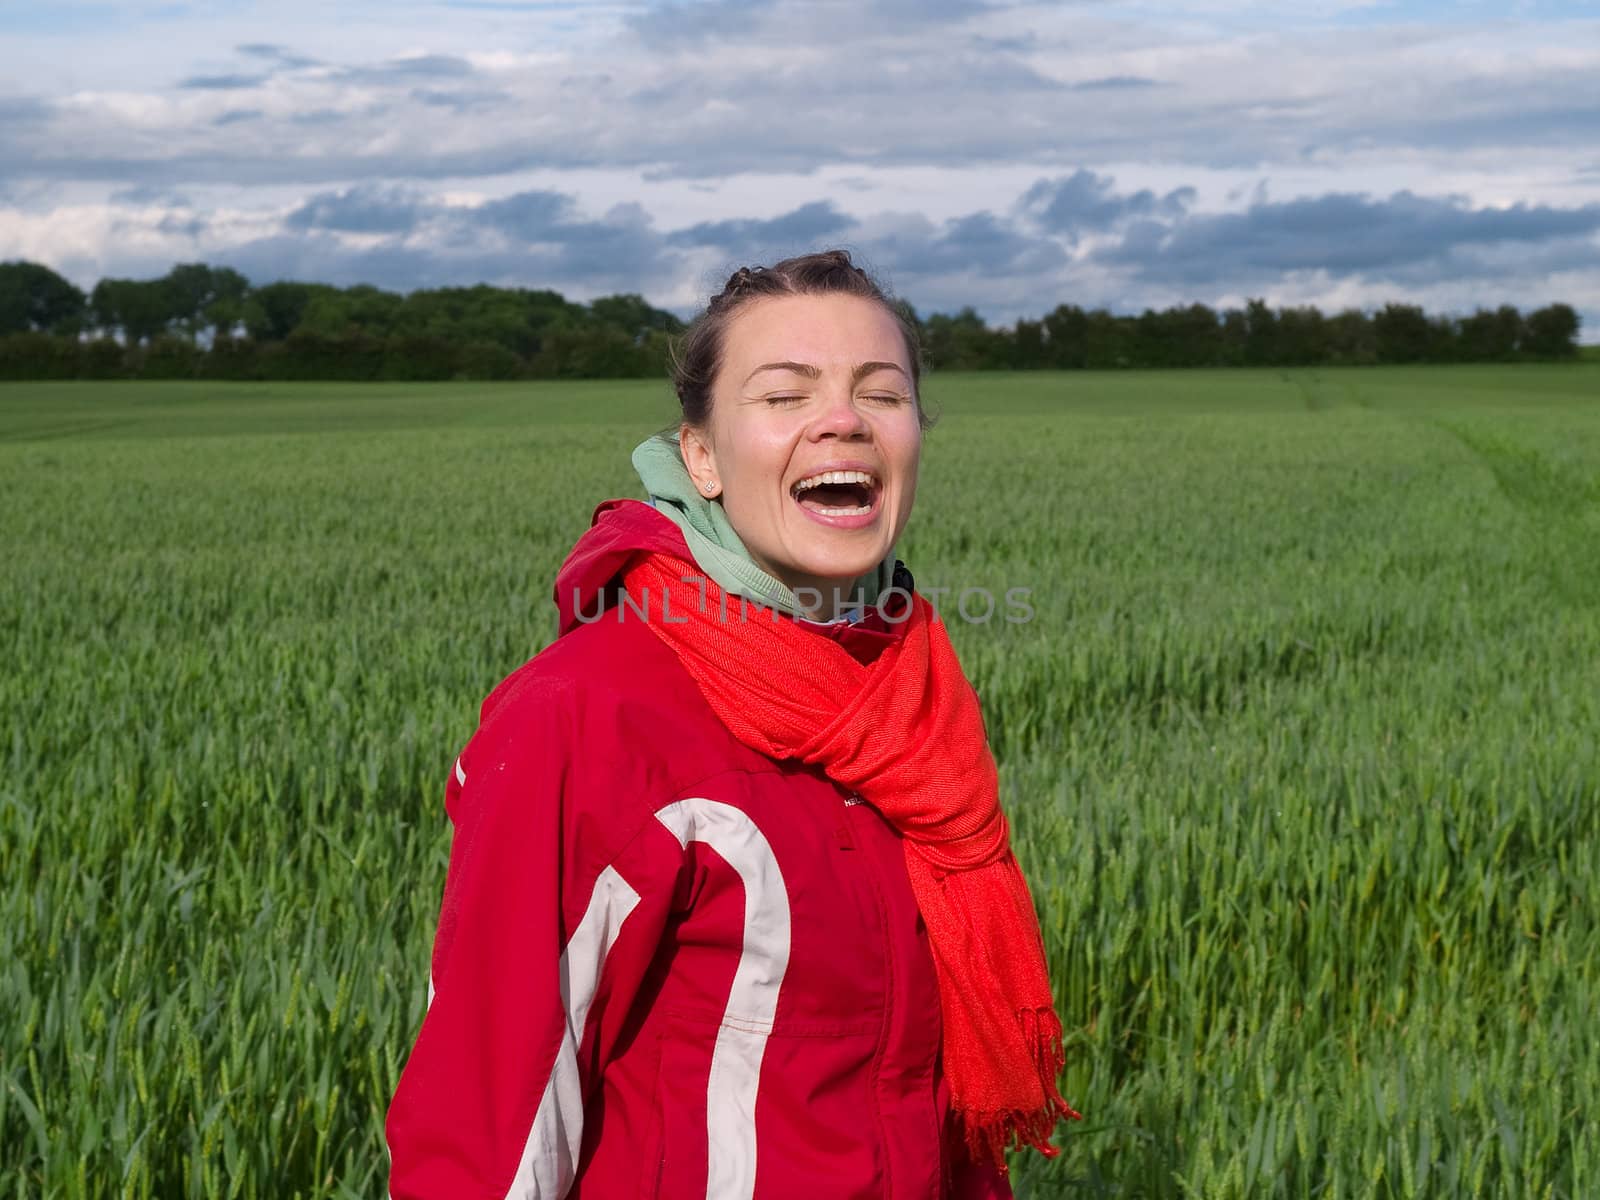 Beautiful attractive smiling young happy woman girl in a green wheat field